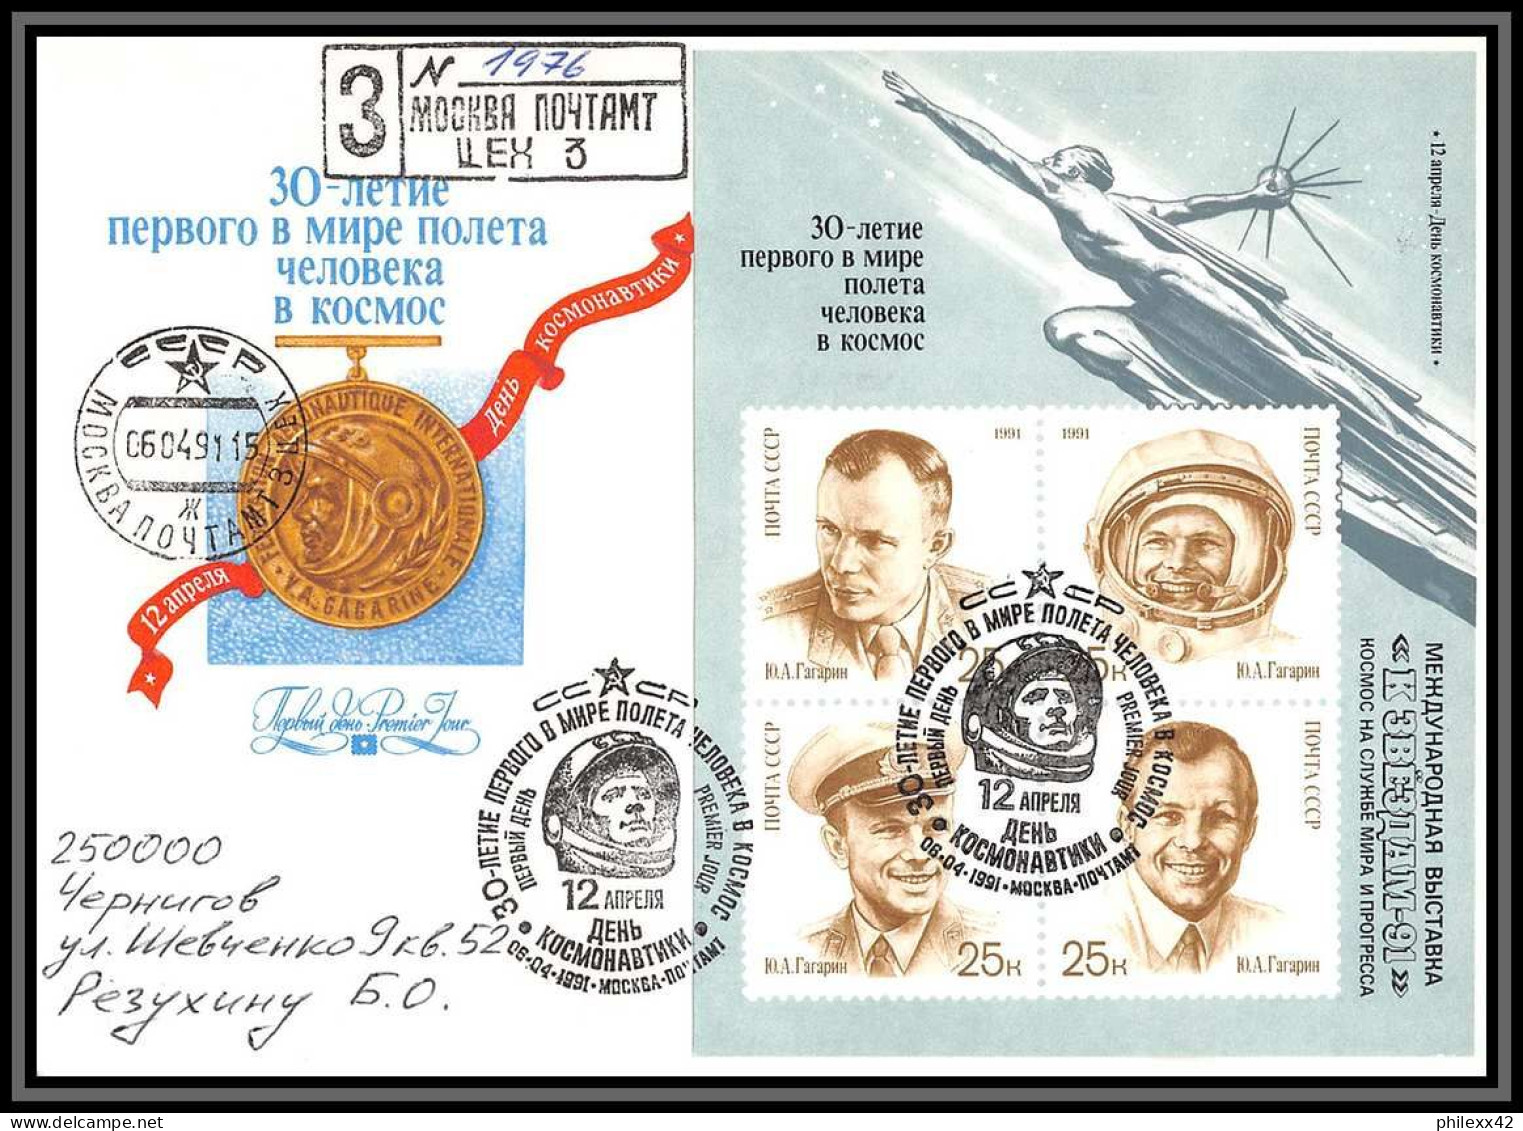 3502a Espace Space Lettre Cover Russie Russia Urss USSR Fdc Gagarine Gagarin Bloc 218 Recommandé Registered - Rusia & URSS